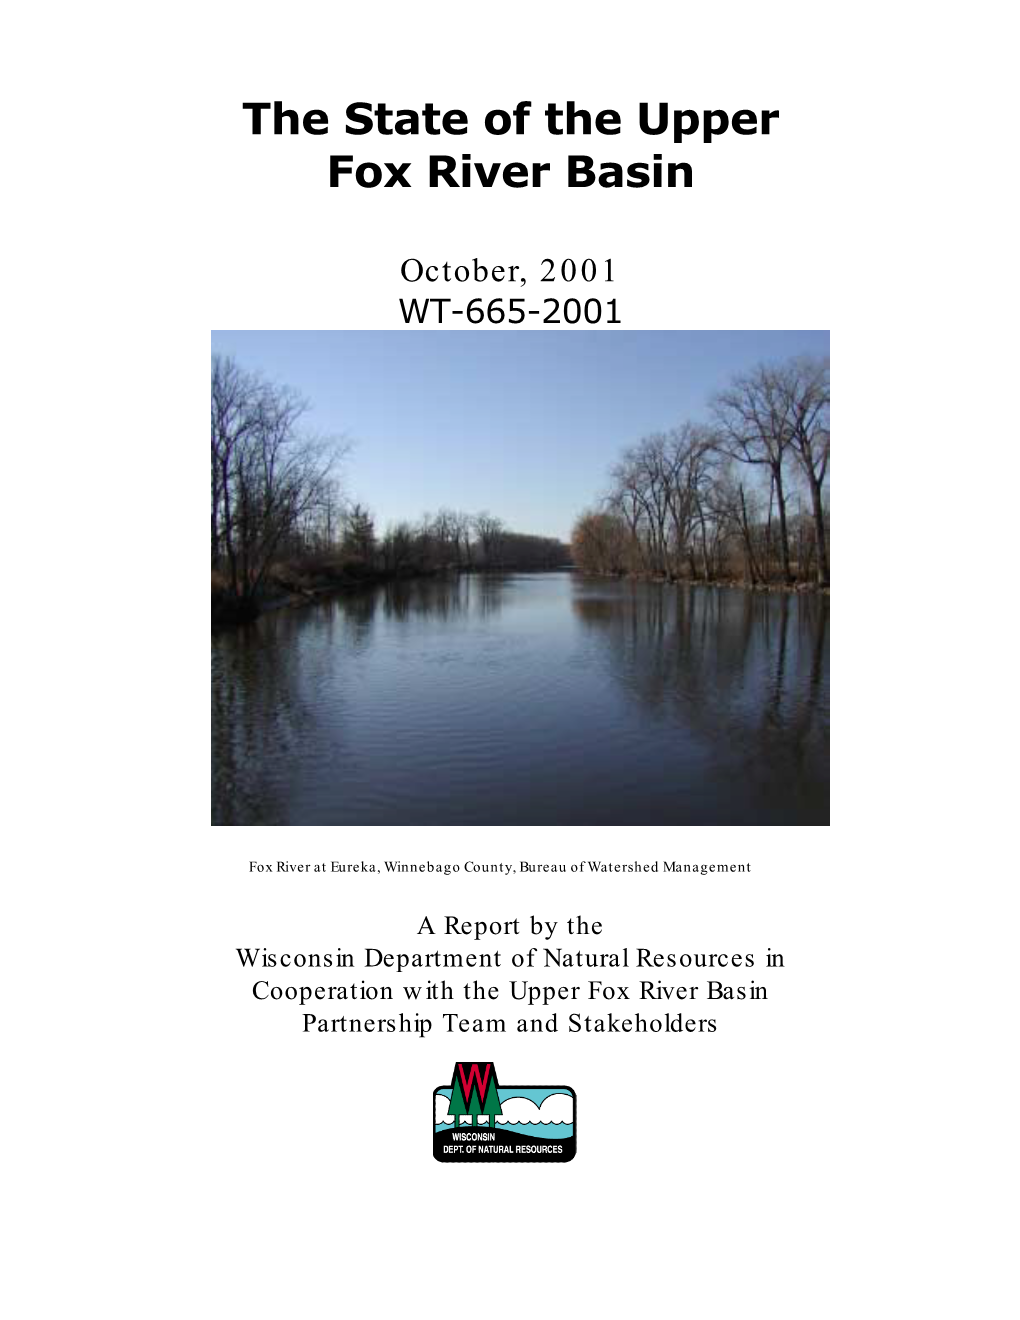 The State of the Upper Fox River Basin